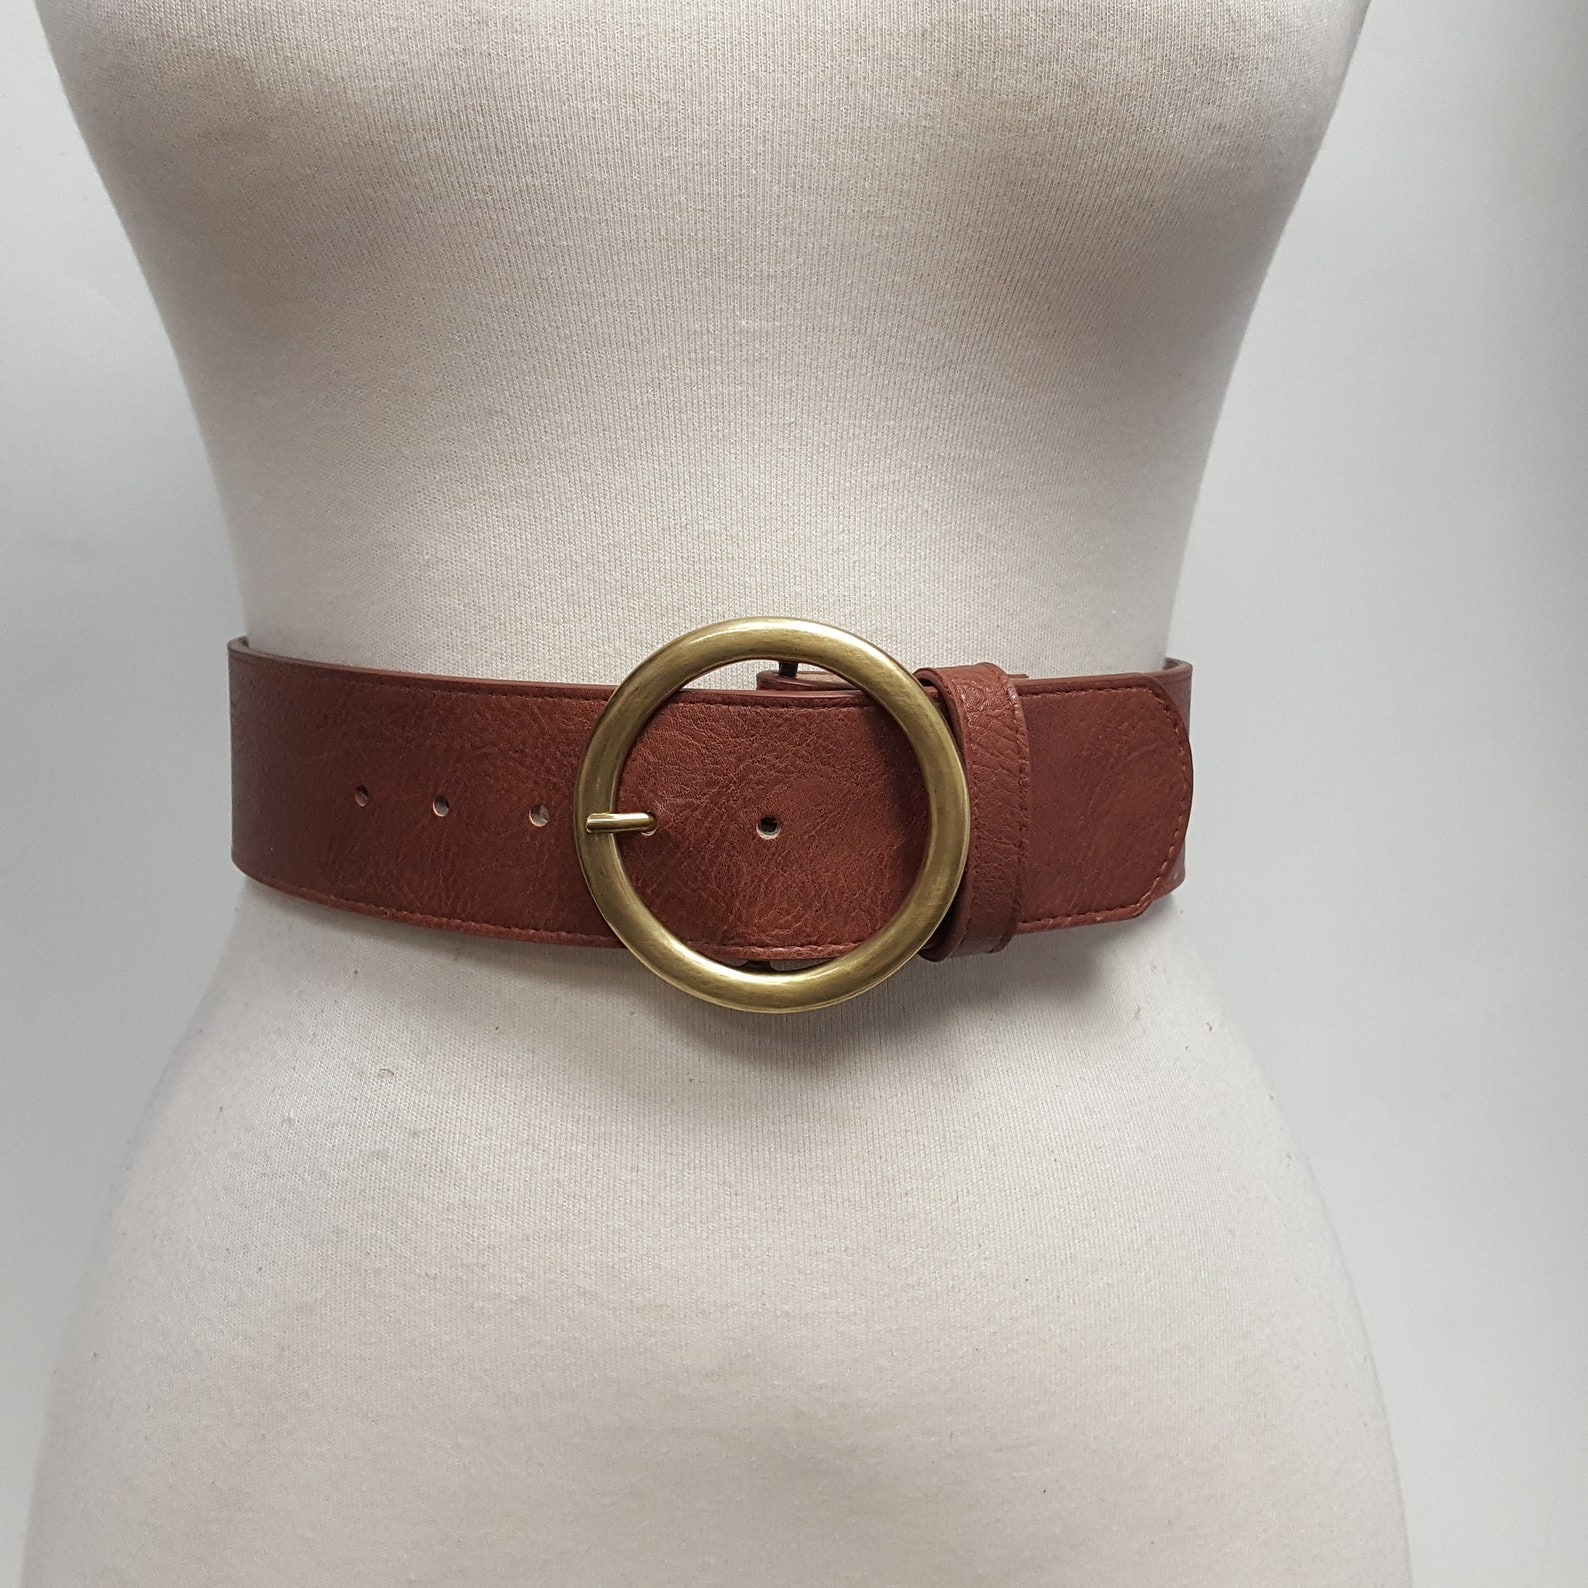 Non-leather Vegan Wide Belt With Round Buckle - Etsy